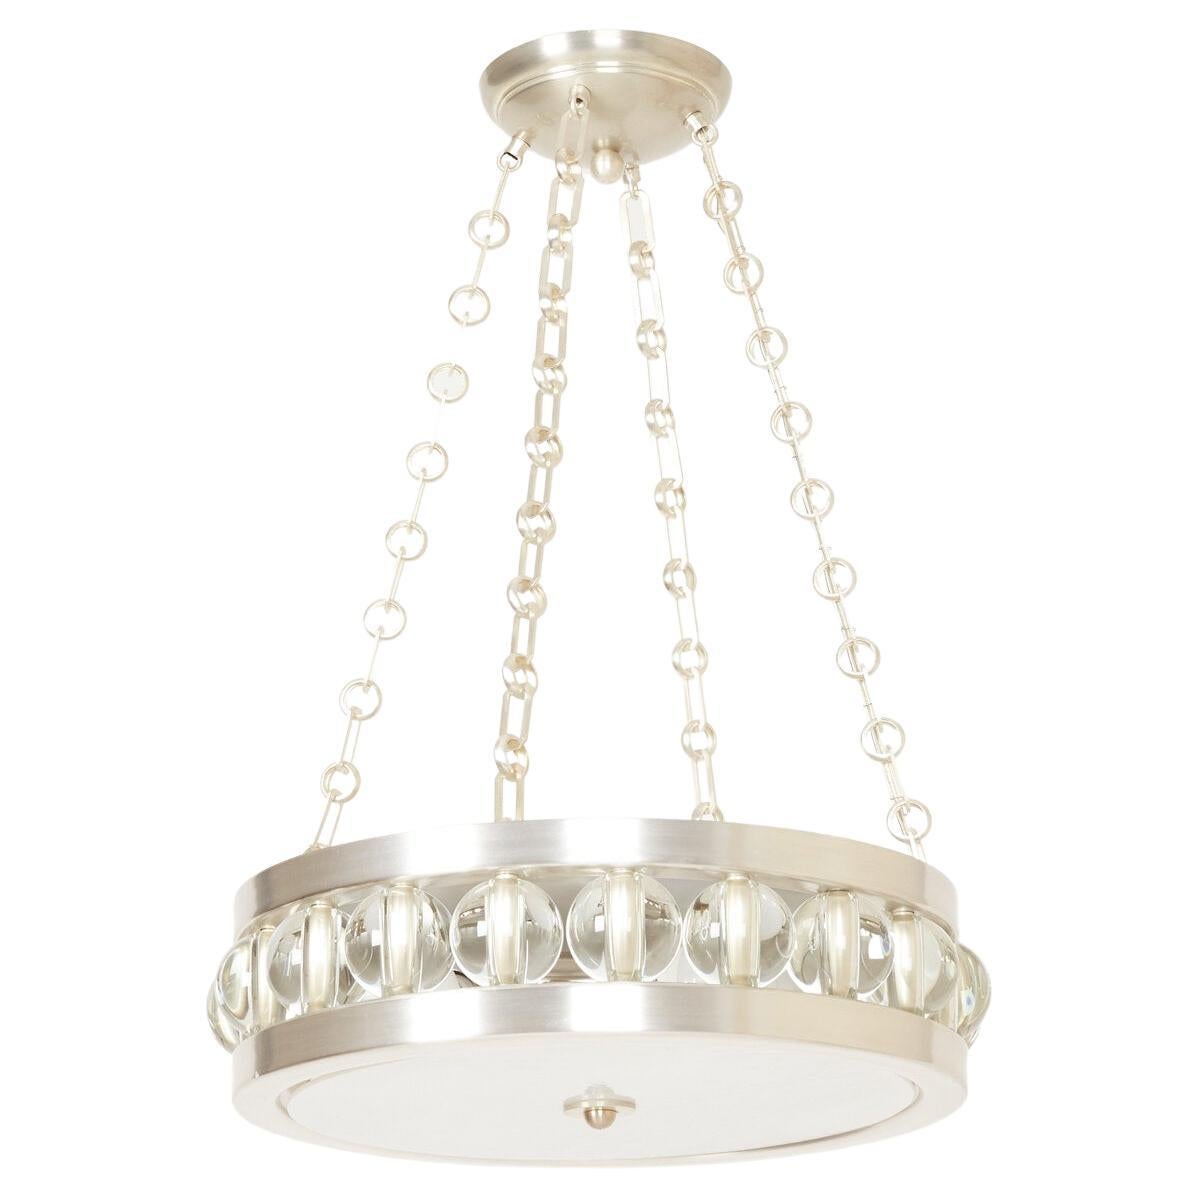 A round Tambour fixture with chain. The metal frame securing a flat piece of white swirl glass with finial in center on underside. The sides with over-scaled Murano glass beads.

Drop is adjustable with a minimum drop of 12